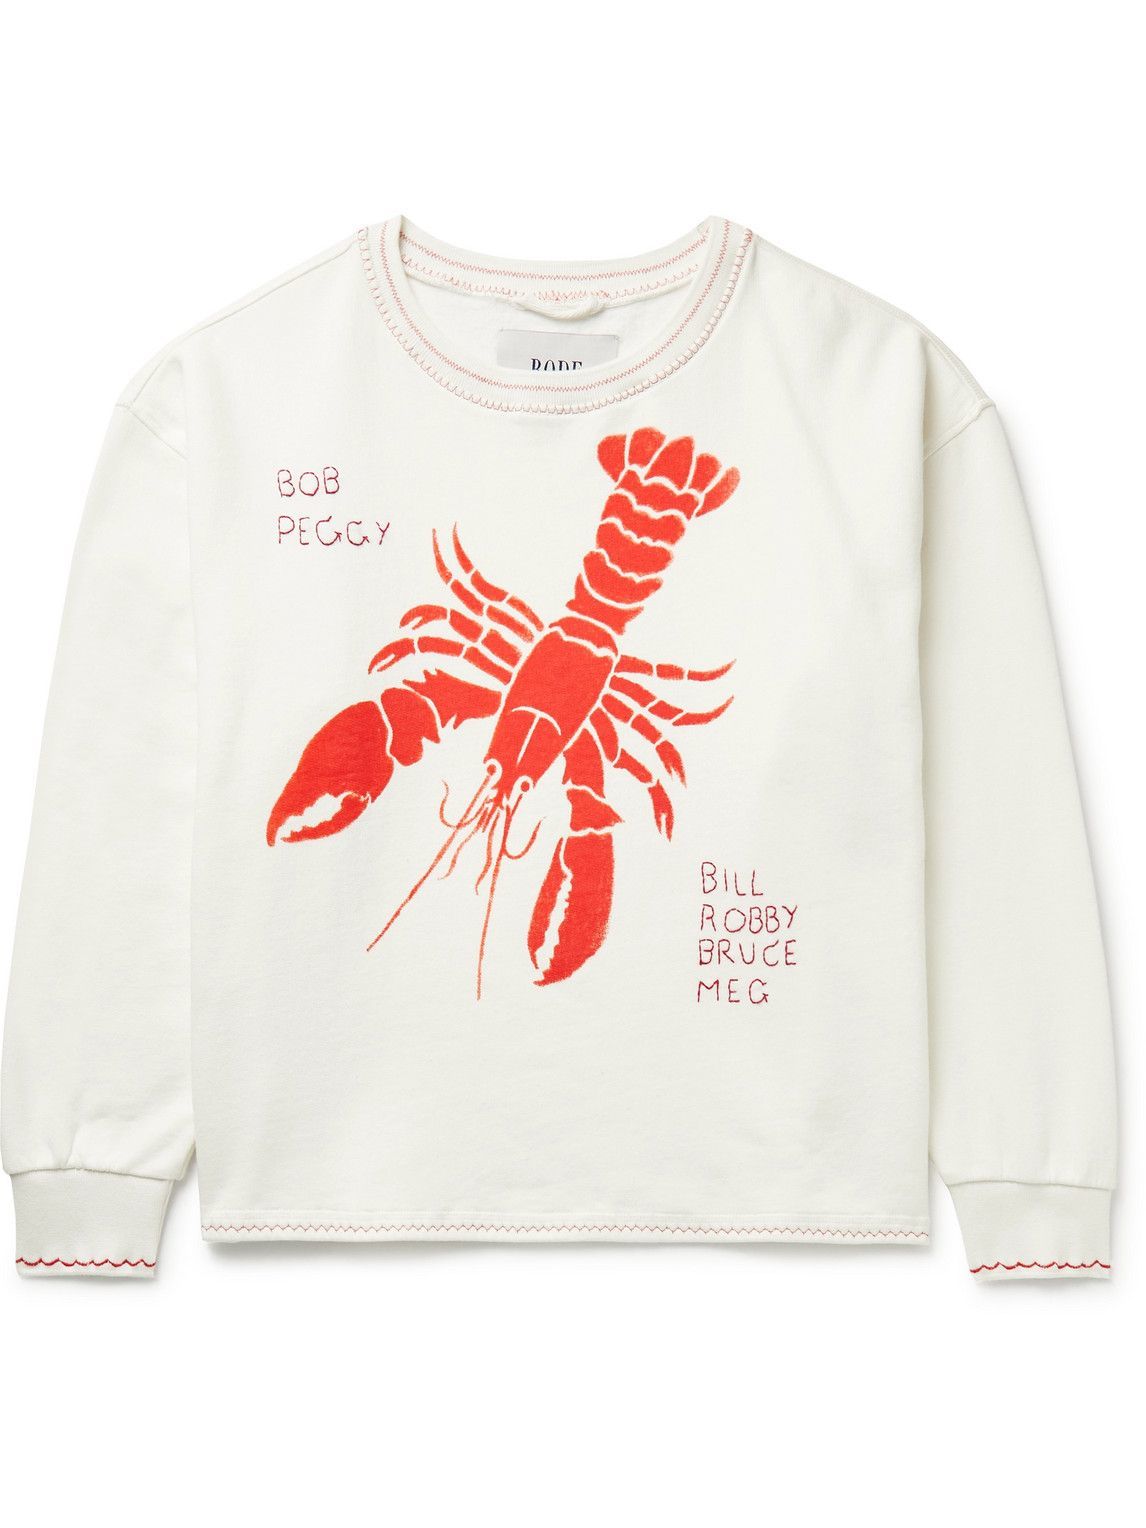 Photo: BODE - Lobster Bake Embroidered Printed Cotton-Jersey Sweatshirt - White